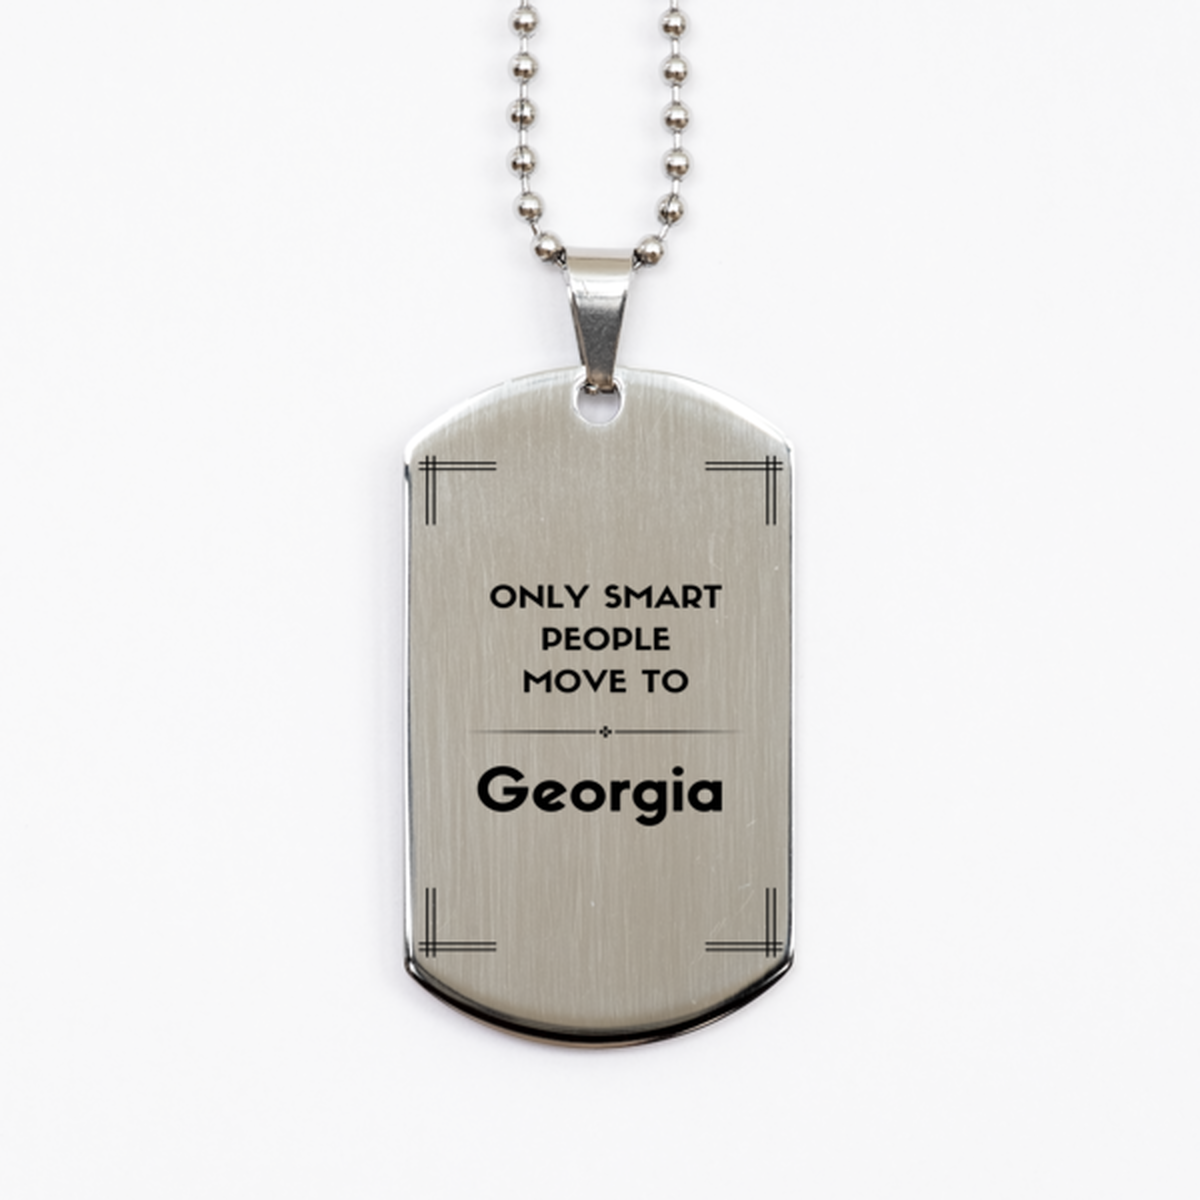 Only smart people move to Georgia Silver Dog Tag, Gag Gifts For Georgia, Move to Georgia Gifts for Friends Coworker Funny Saying Quote